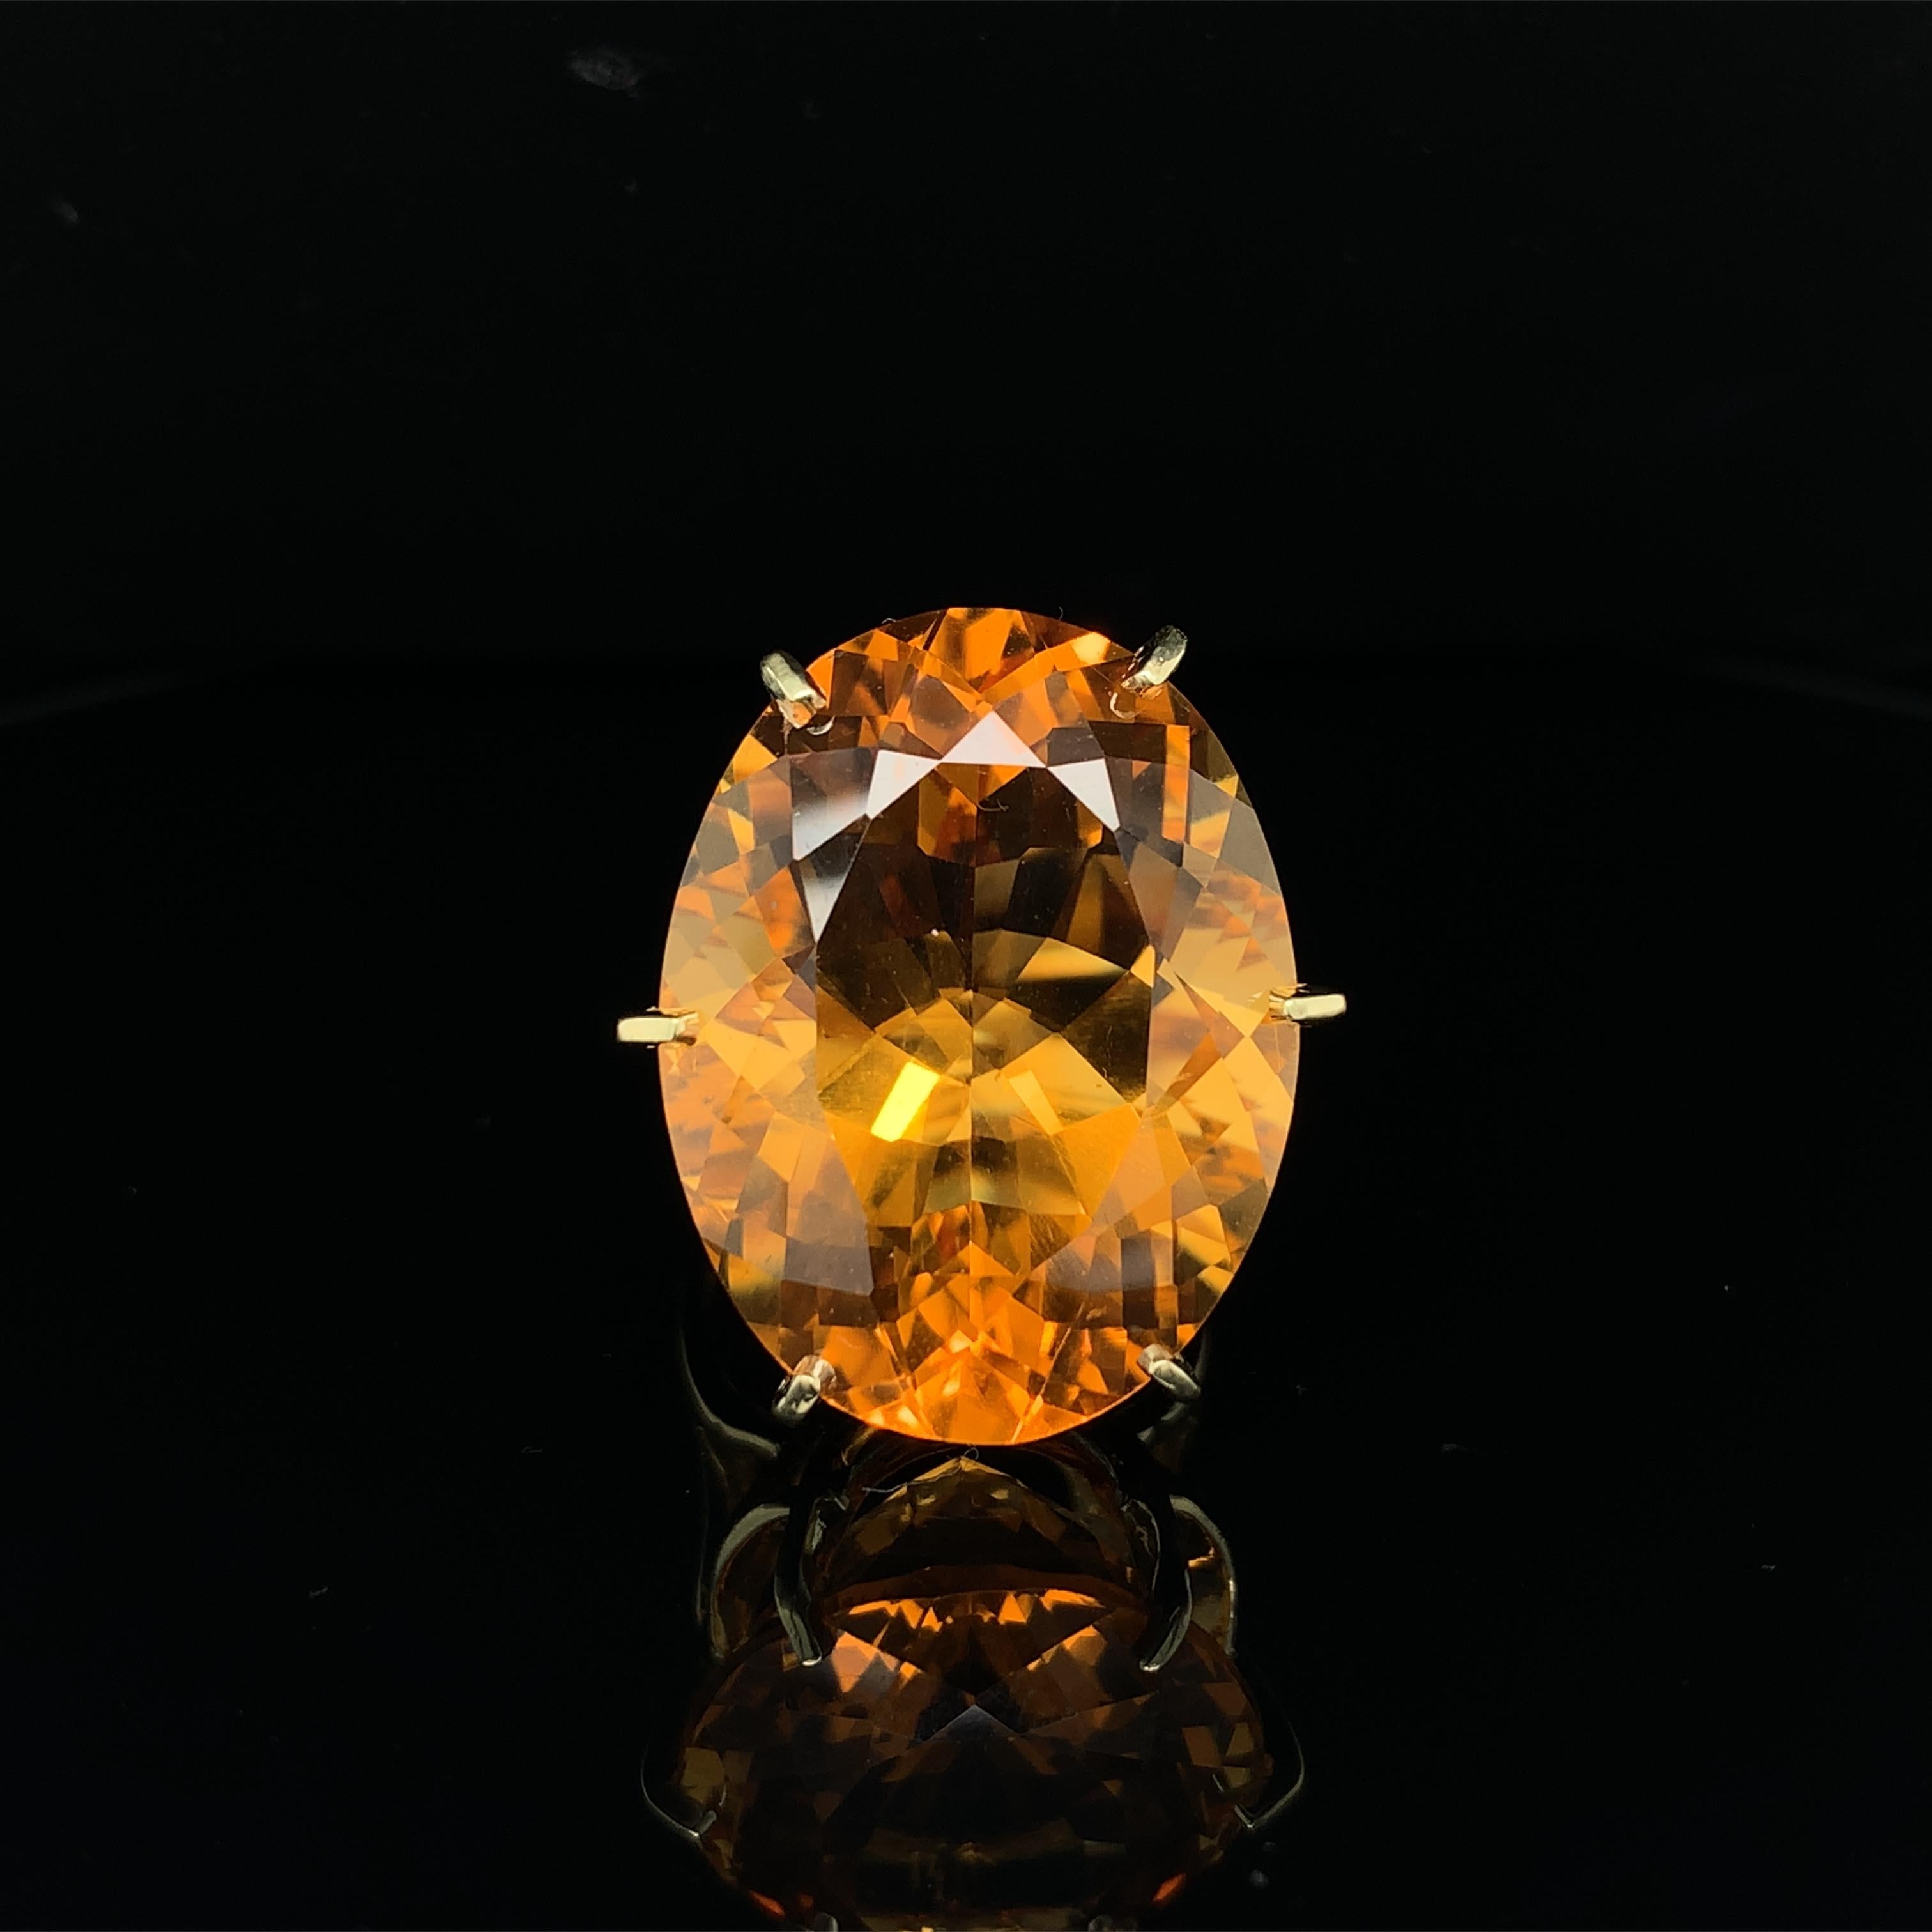 18K yellow gold ring featuring a large oval citrine weighing 37.31 carats. The citrine is freshly polished and has extra faceting. It has a golden orange-yellow color. The citrine measures about 26mm x 20mm. The ring fits a size 8.75 finger and is